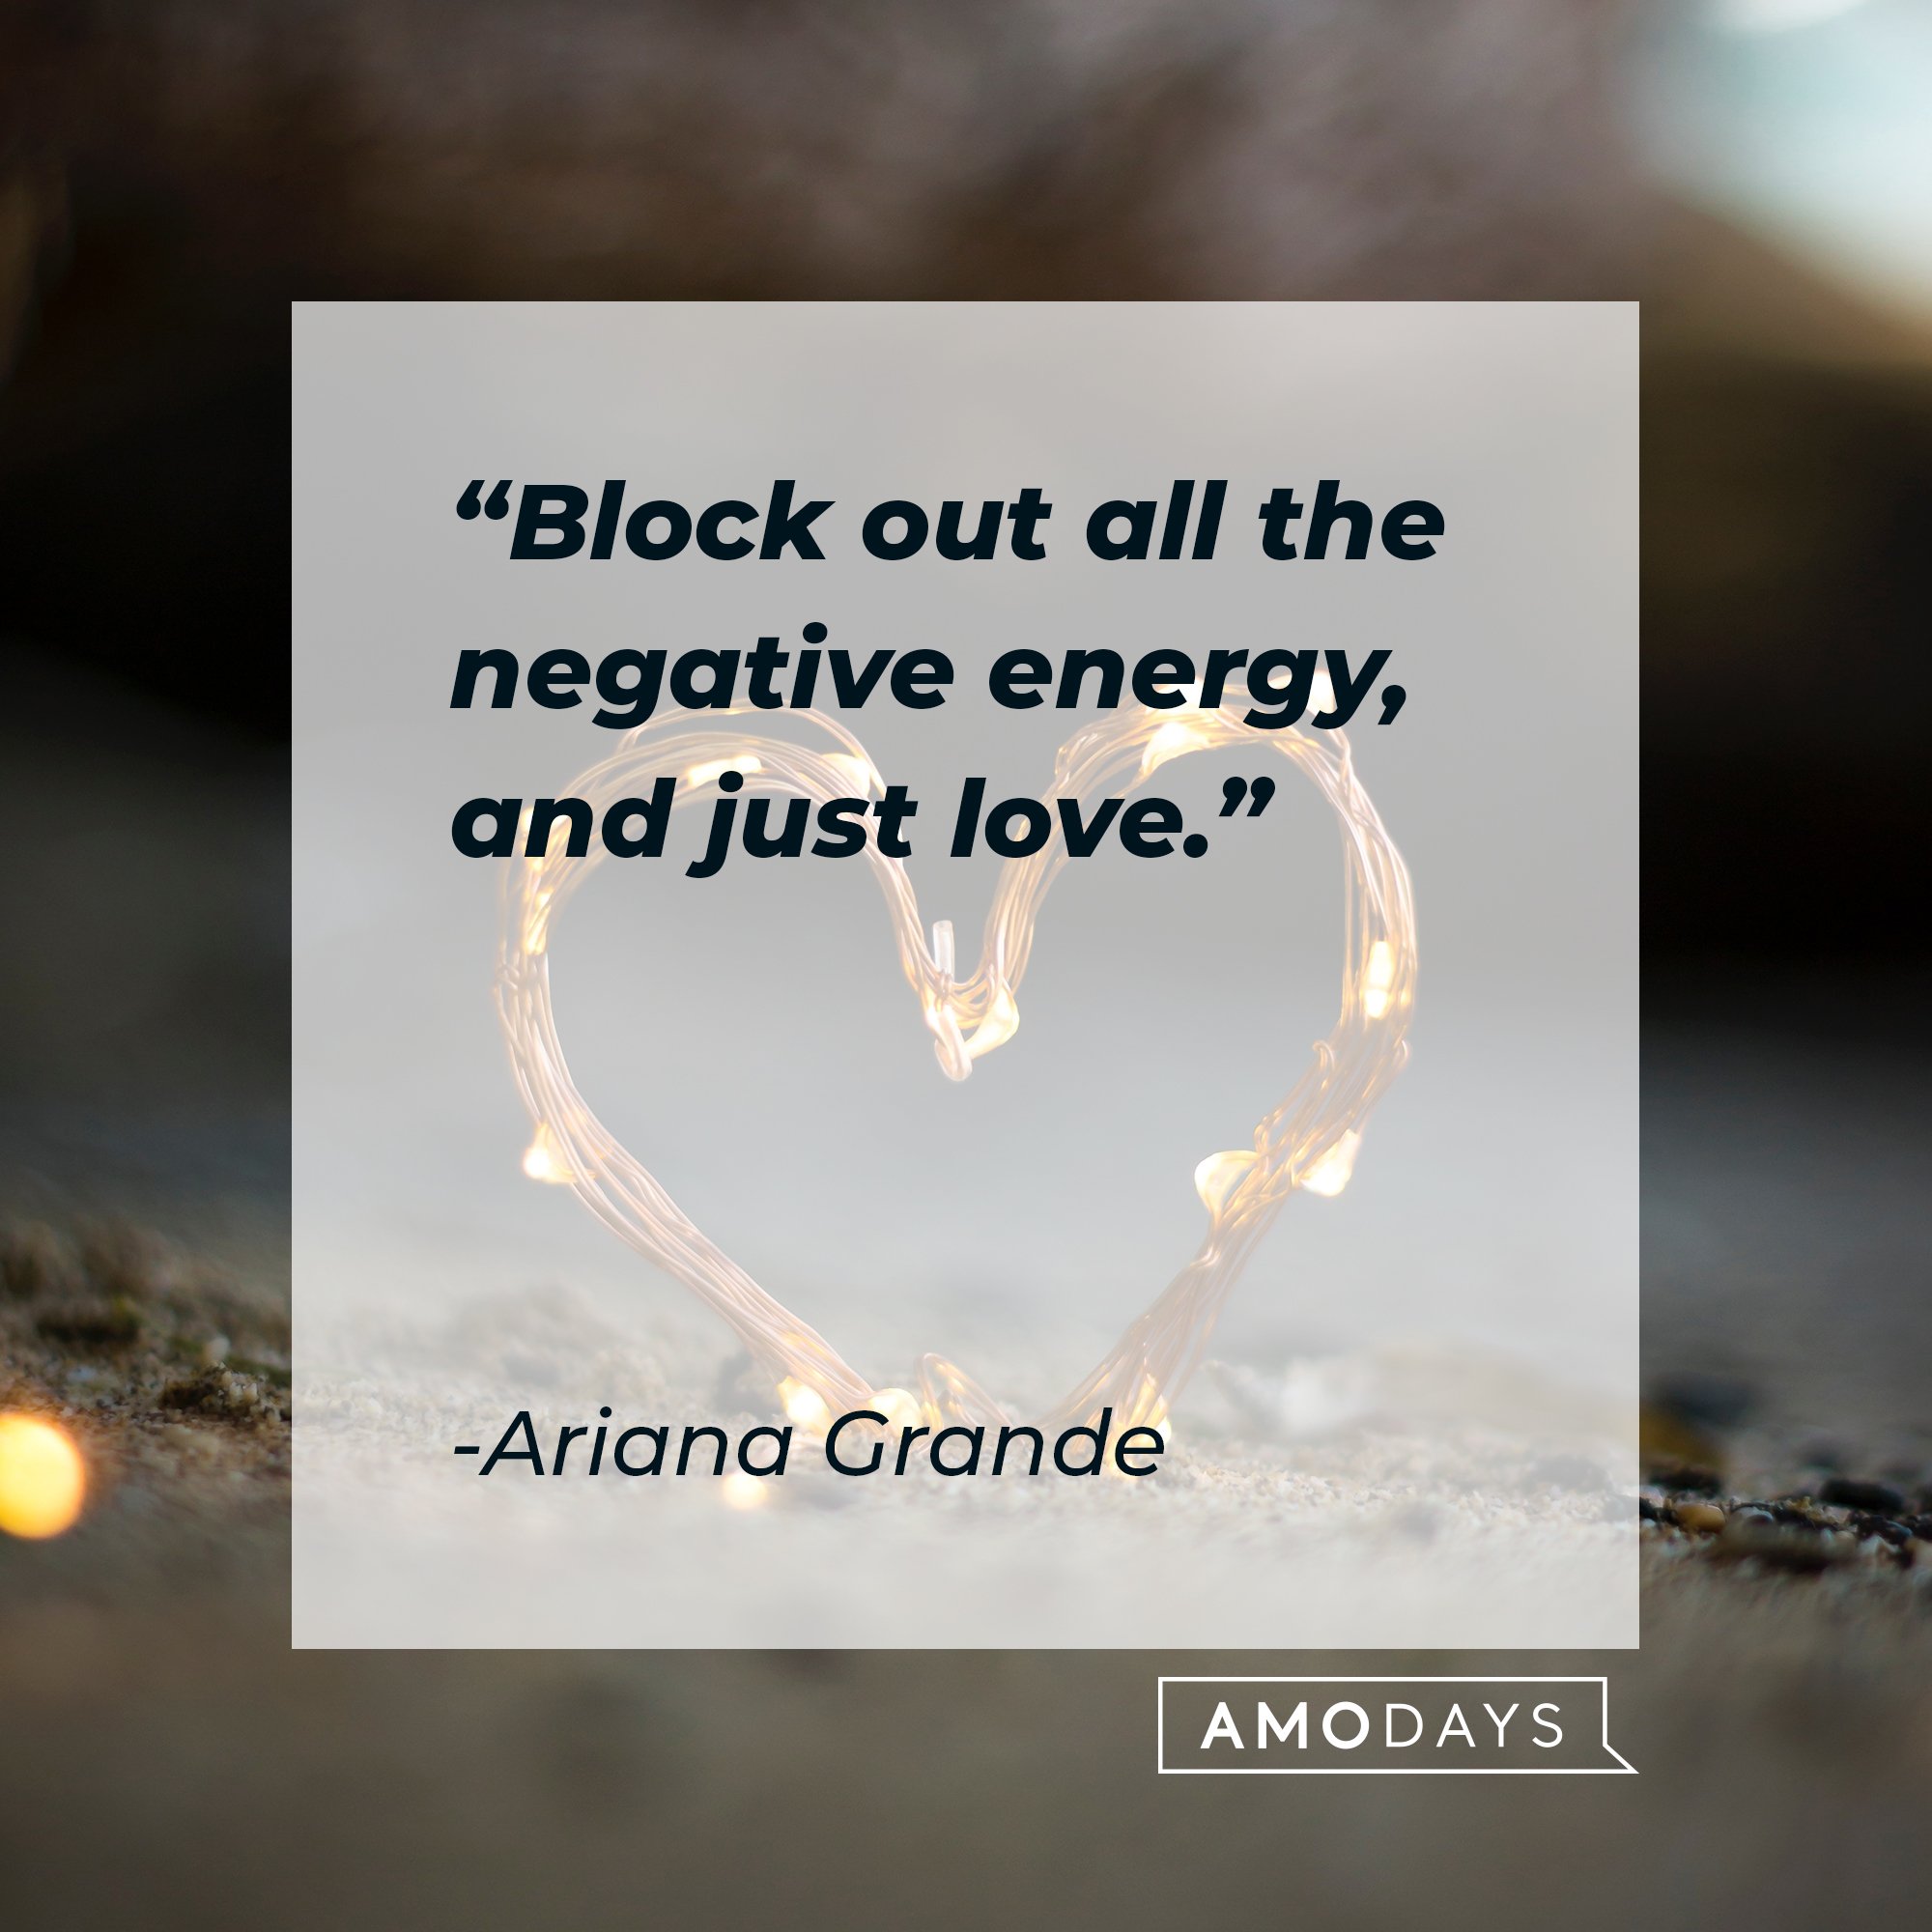 Ariana Grande’s quote: "Block out all the negative energy, and just love.” | Image: AmoDays 